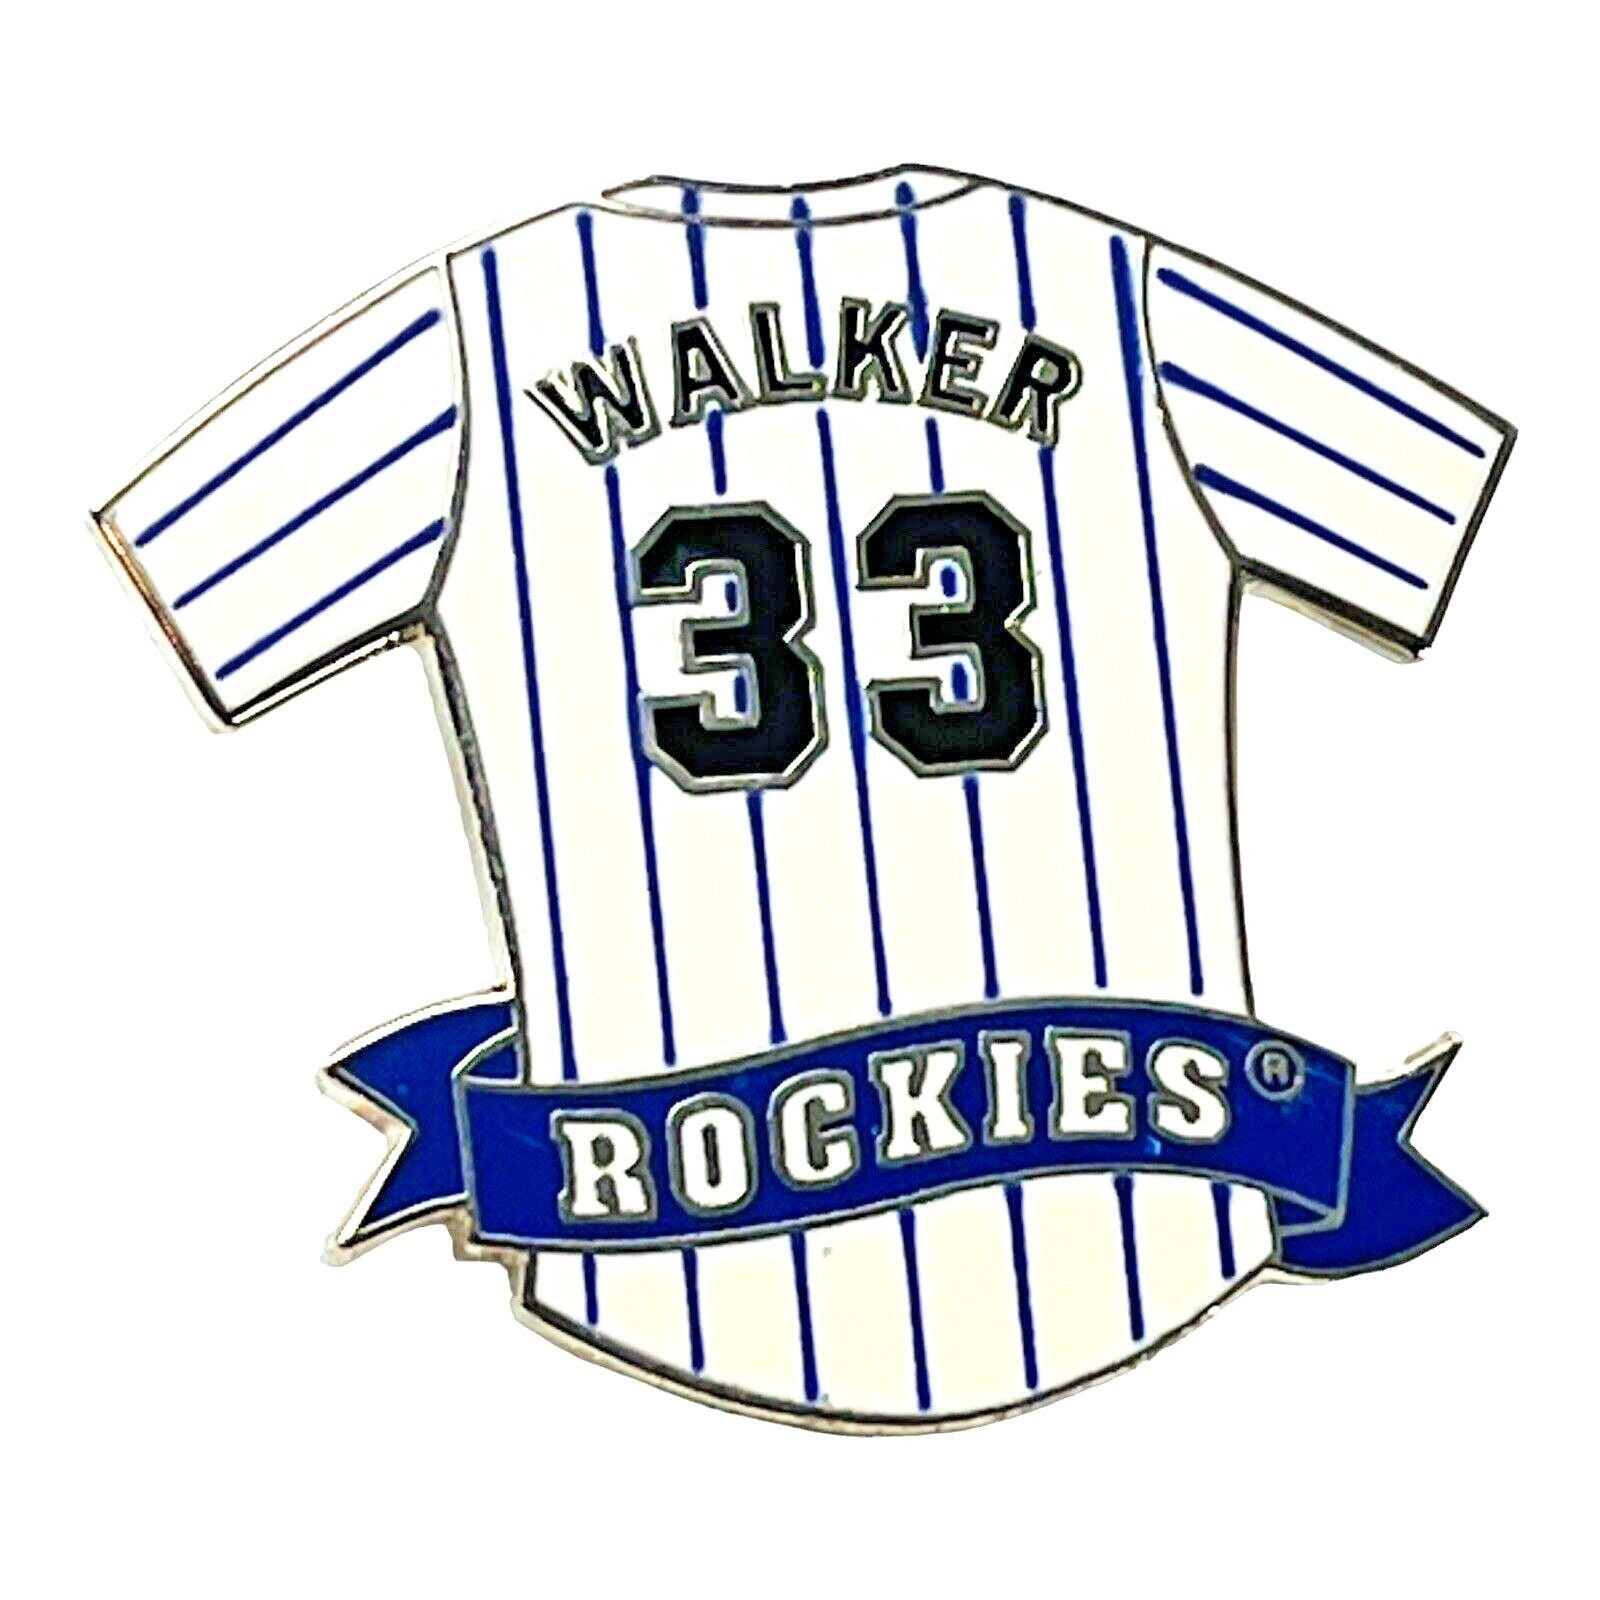 Larry Walker Signed Montreal Expos Jersey Hall Of Fame Rockies Cards PSA/DNA